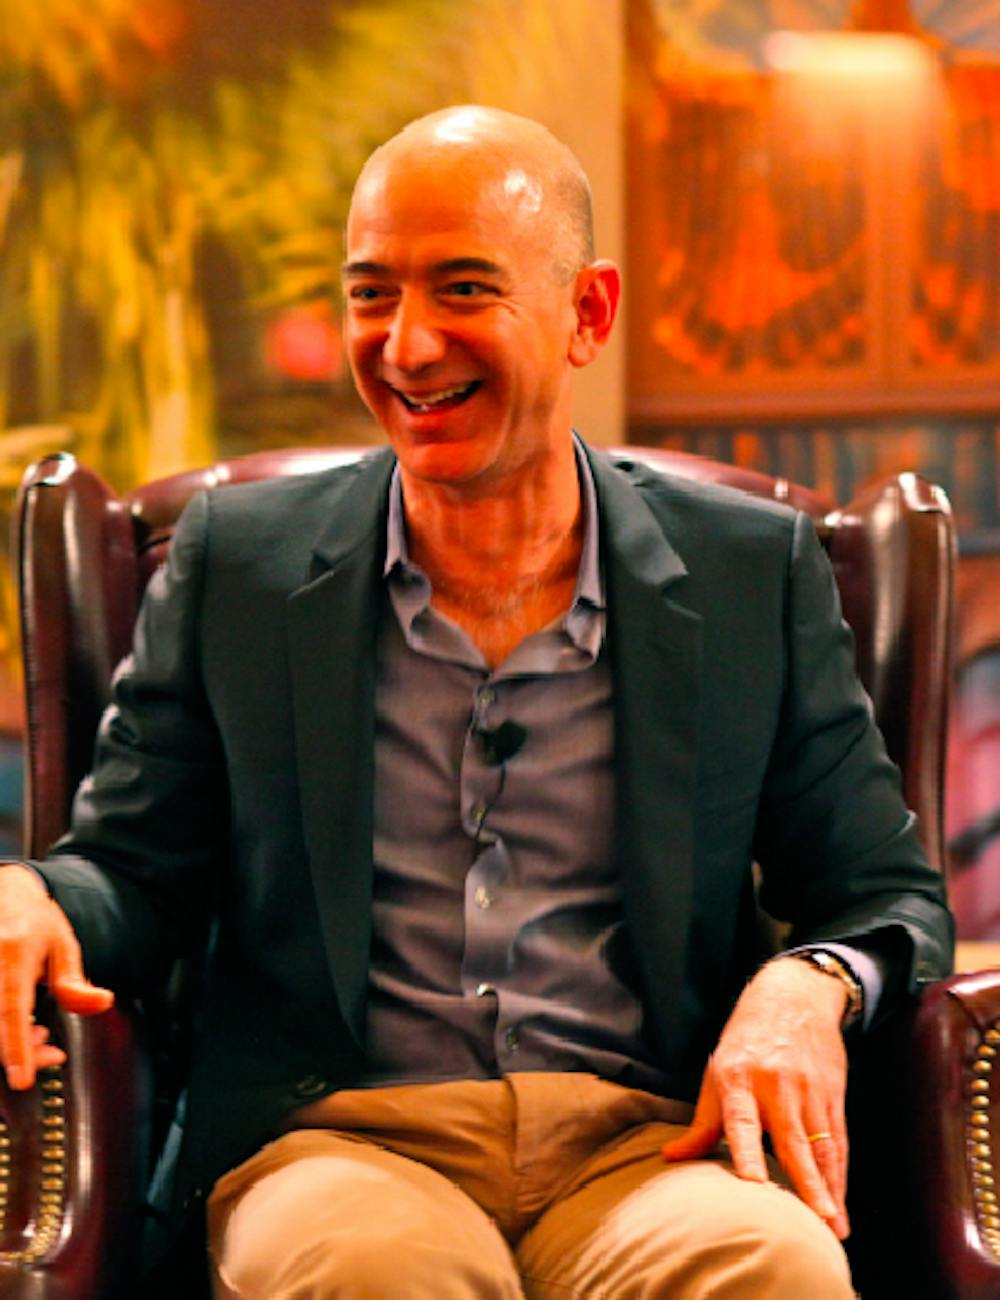 PUBLIC DOMAIN
“Jeff Bezos looks more and more like a super villain everyday.”